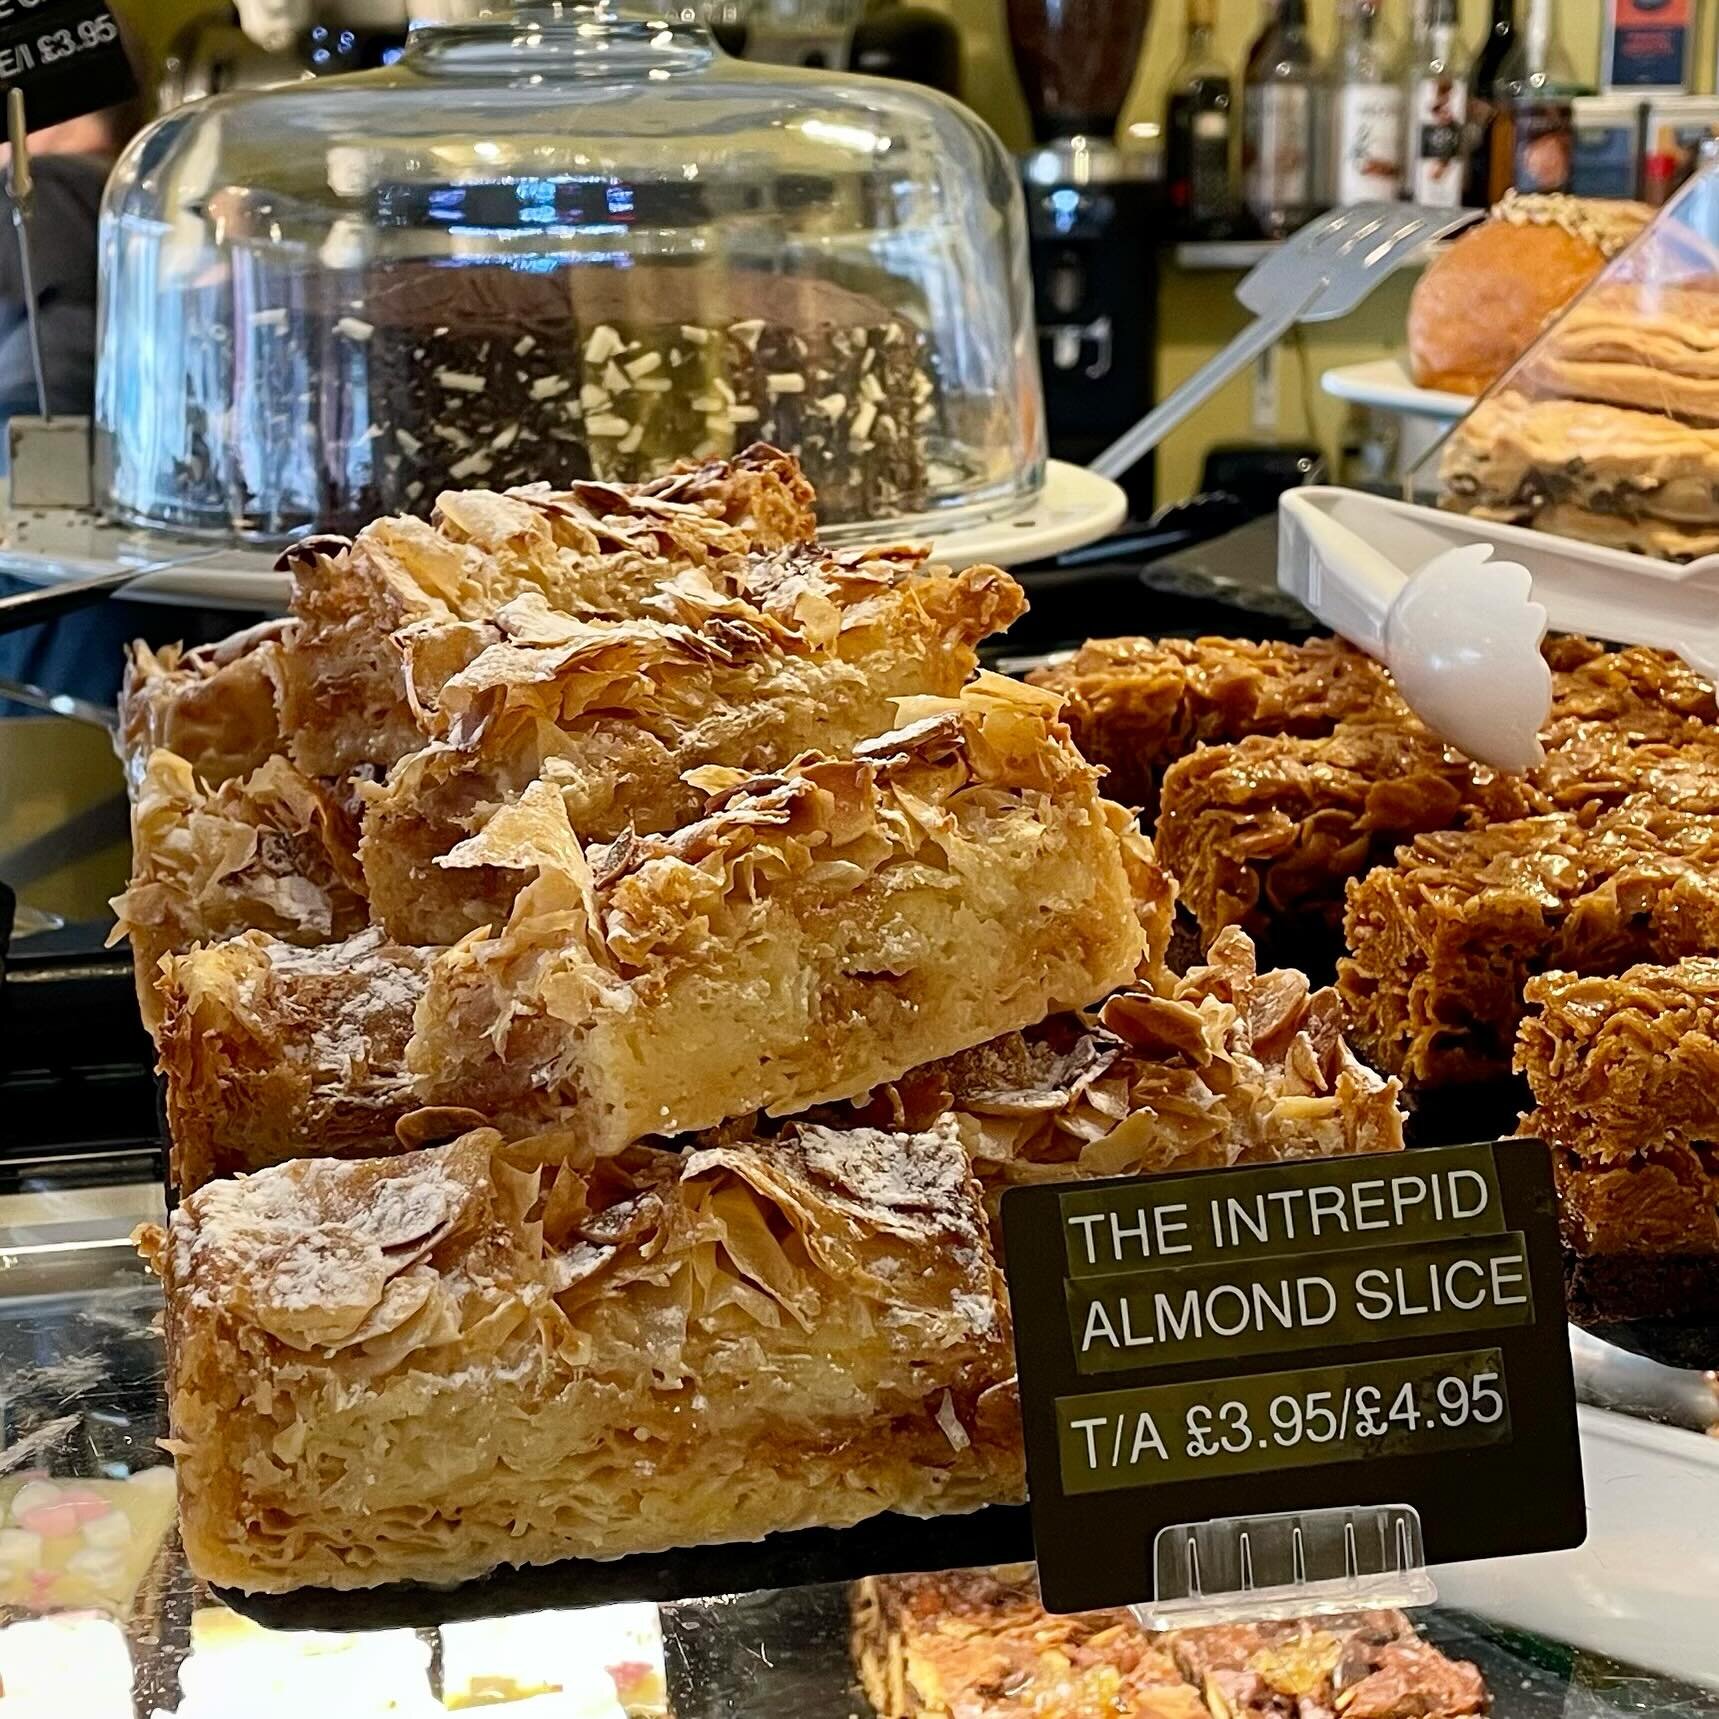 This wonderful, decadent pastry covers all bases - crunchy, chewy, sweet &amp; nutty. My choice for a breakfast treat this weekend. Thank you @intrepidbakers_nw5 for your inspiration!